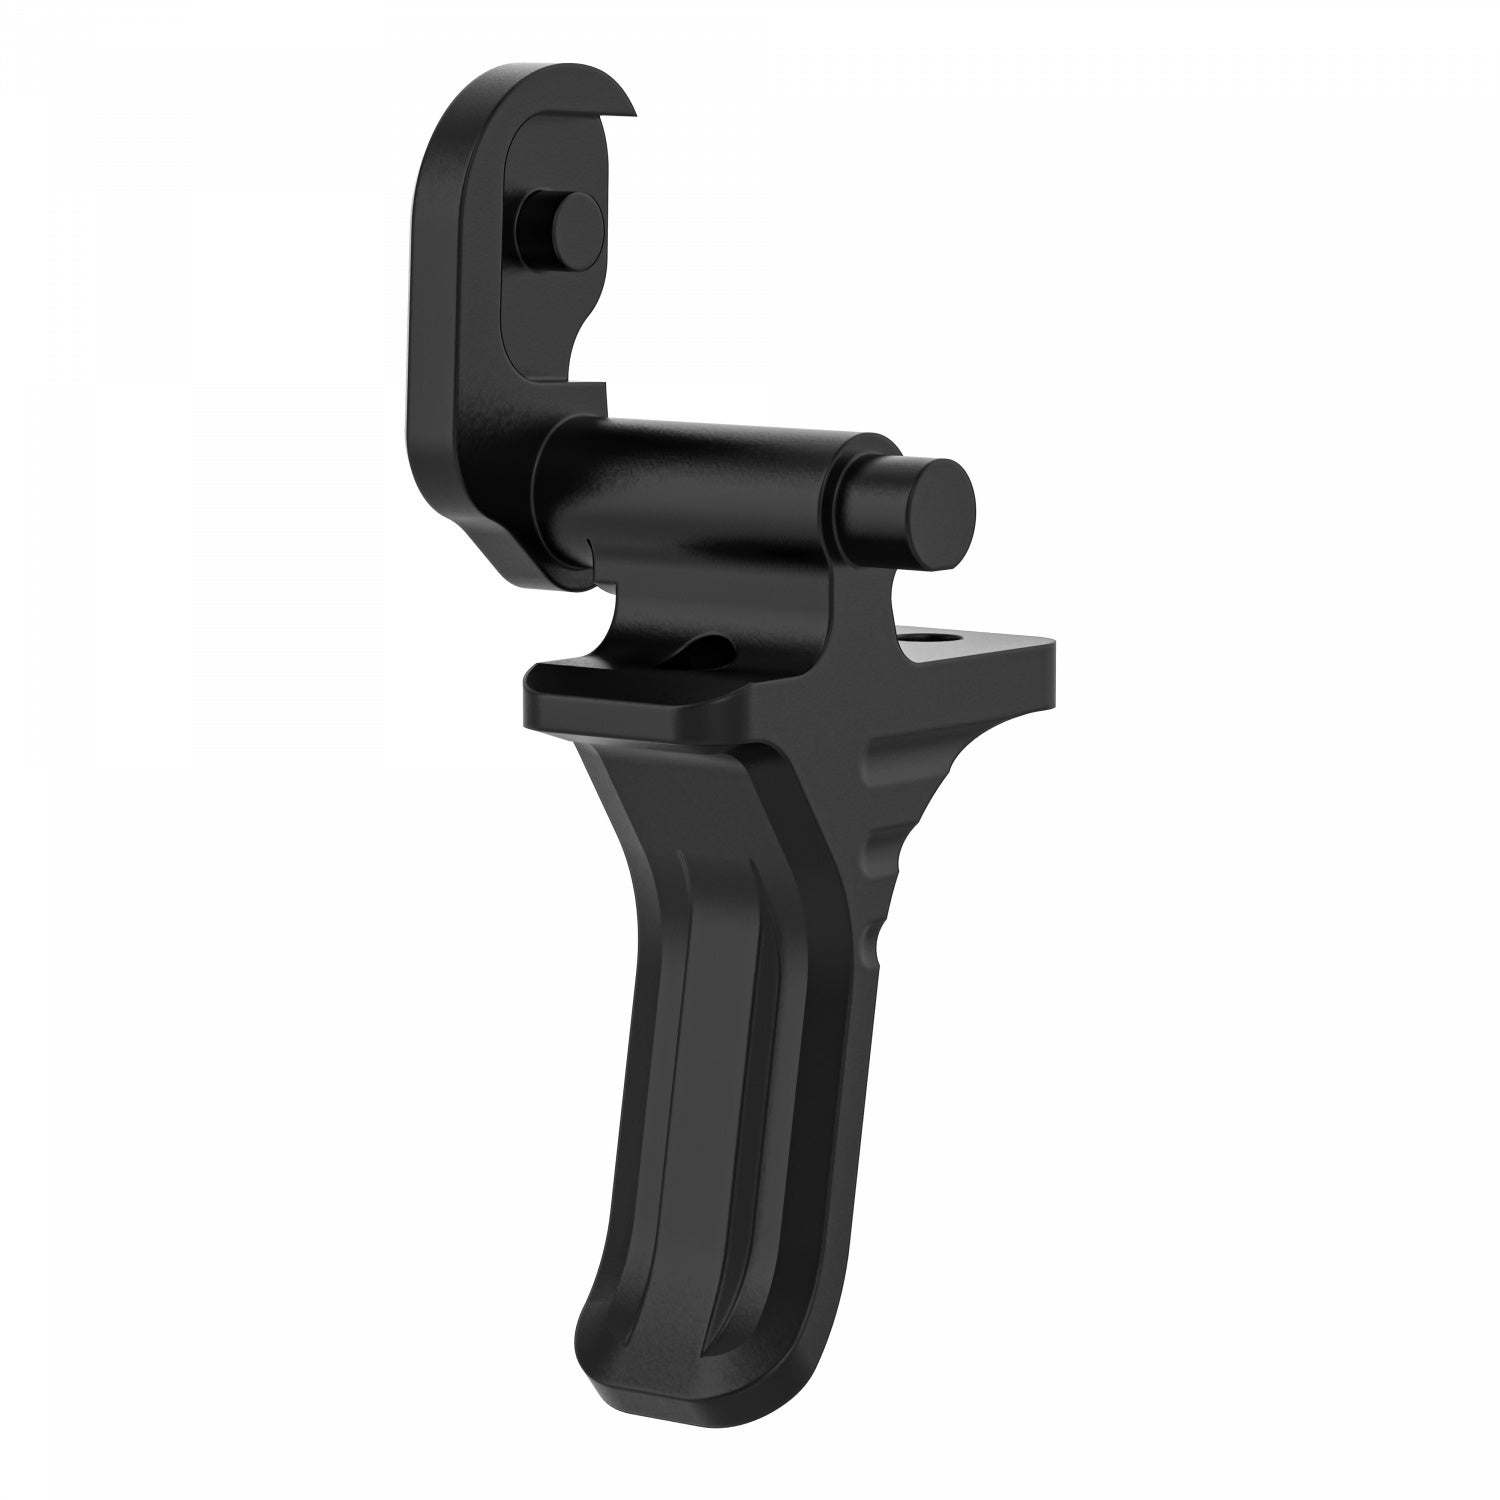 Fully Adjustable Legionnaire Competition Trigger from Keres Dynamics